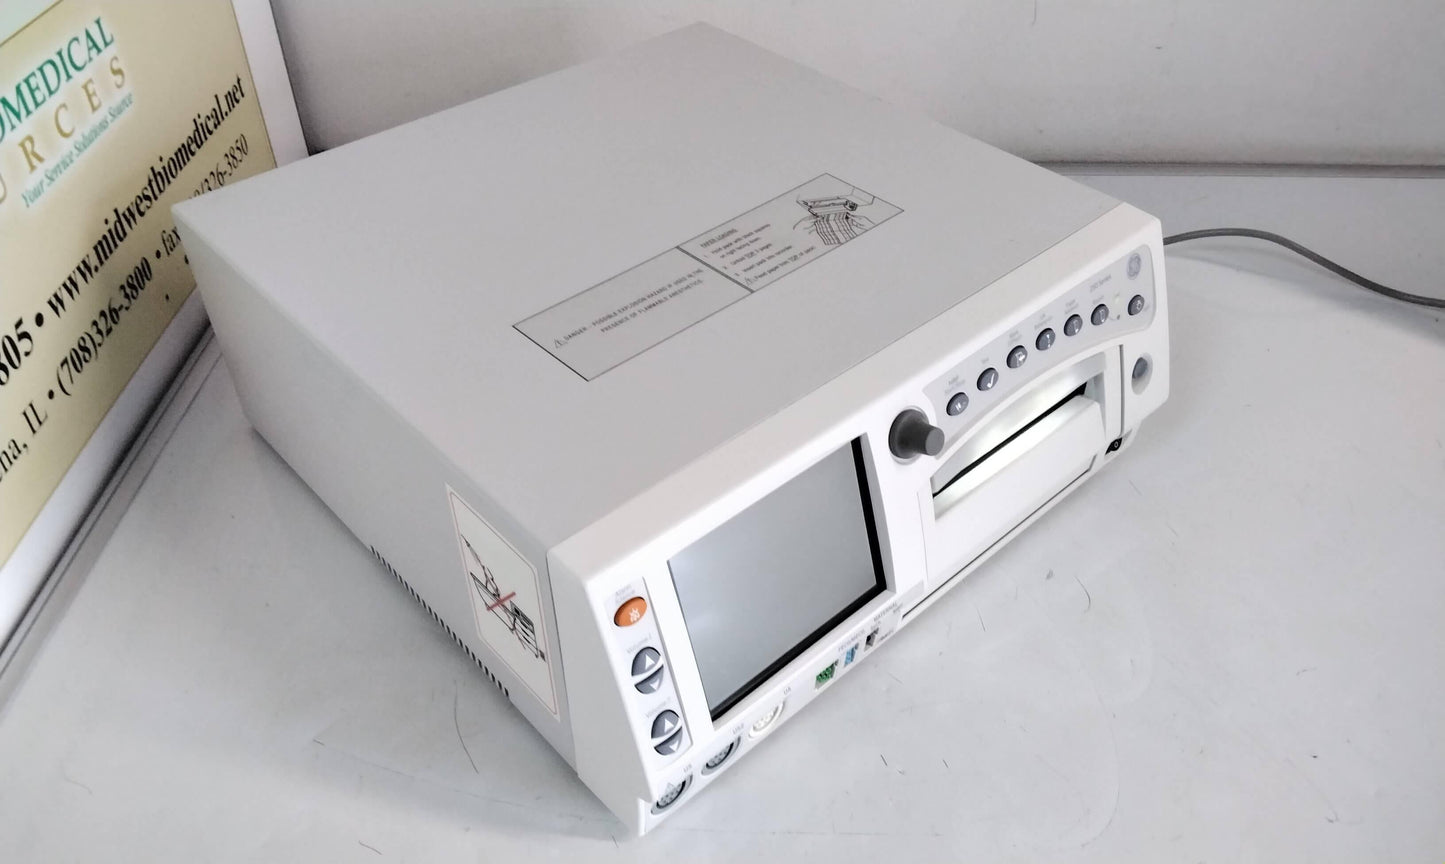 USED GE Corometrics 259CX Fetal Monitor 2024489 with Free Shipping and Warranty - MBR Medicals